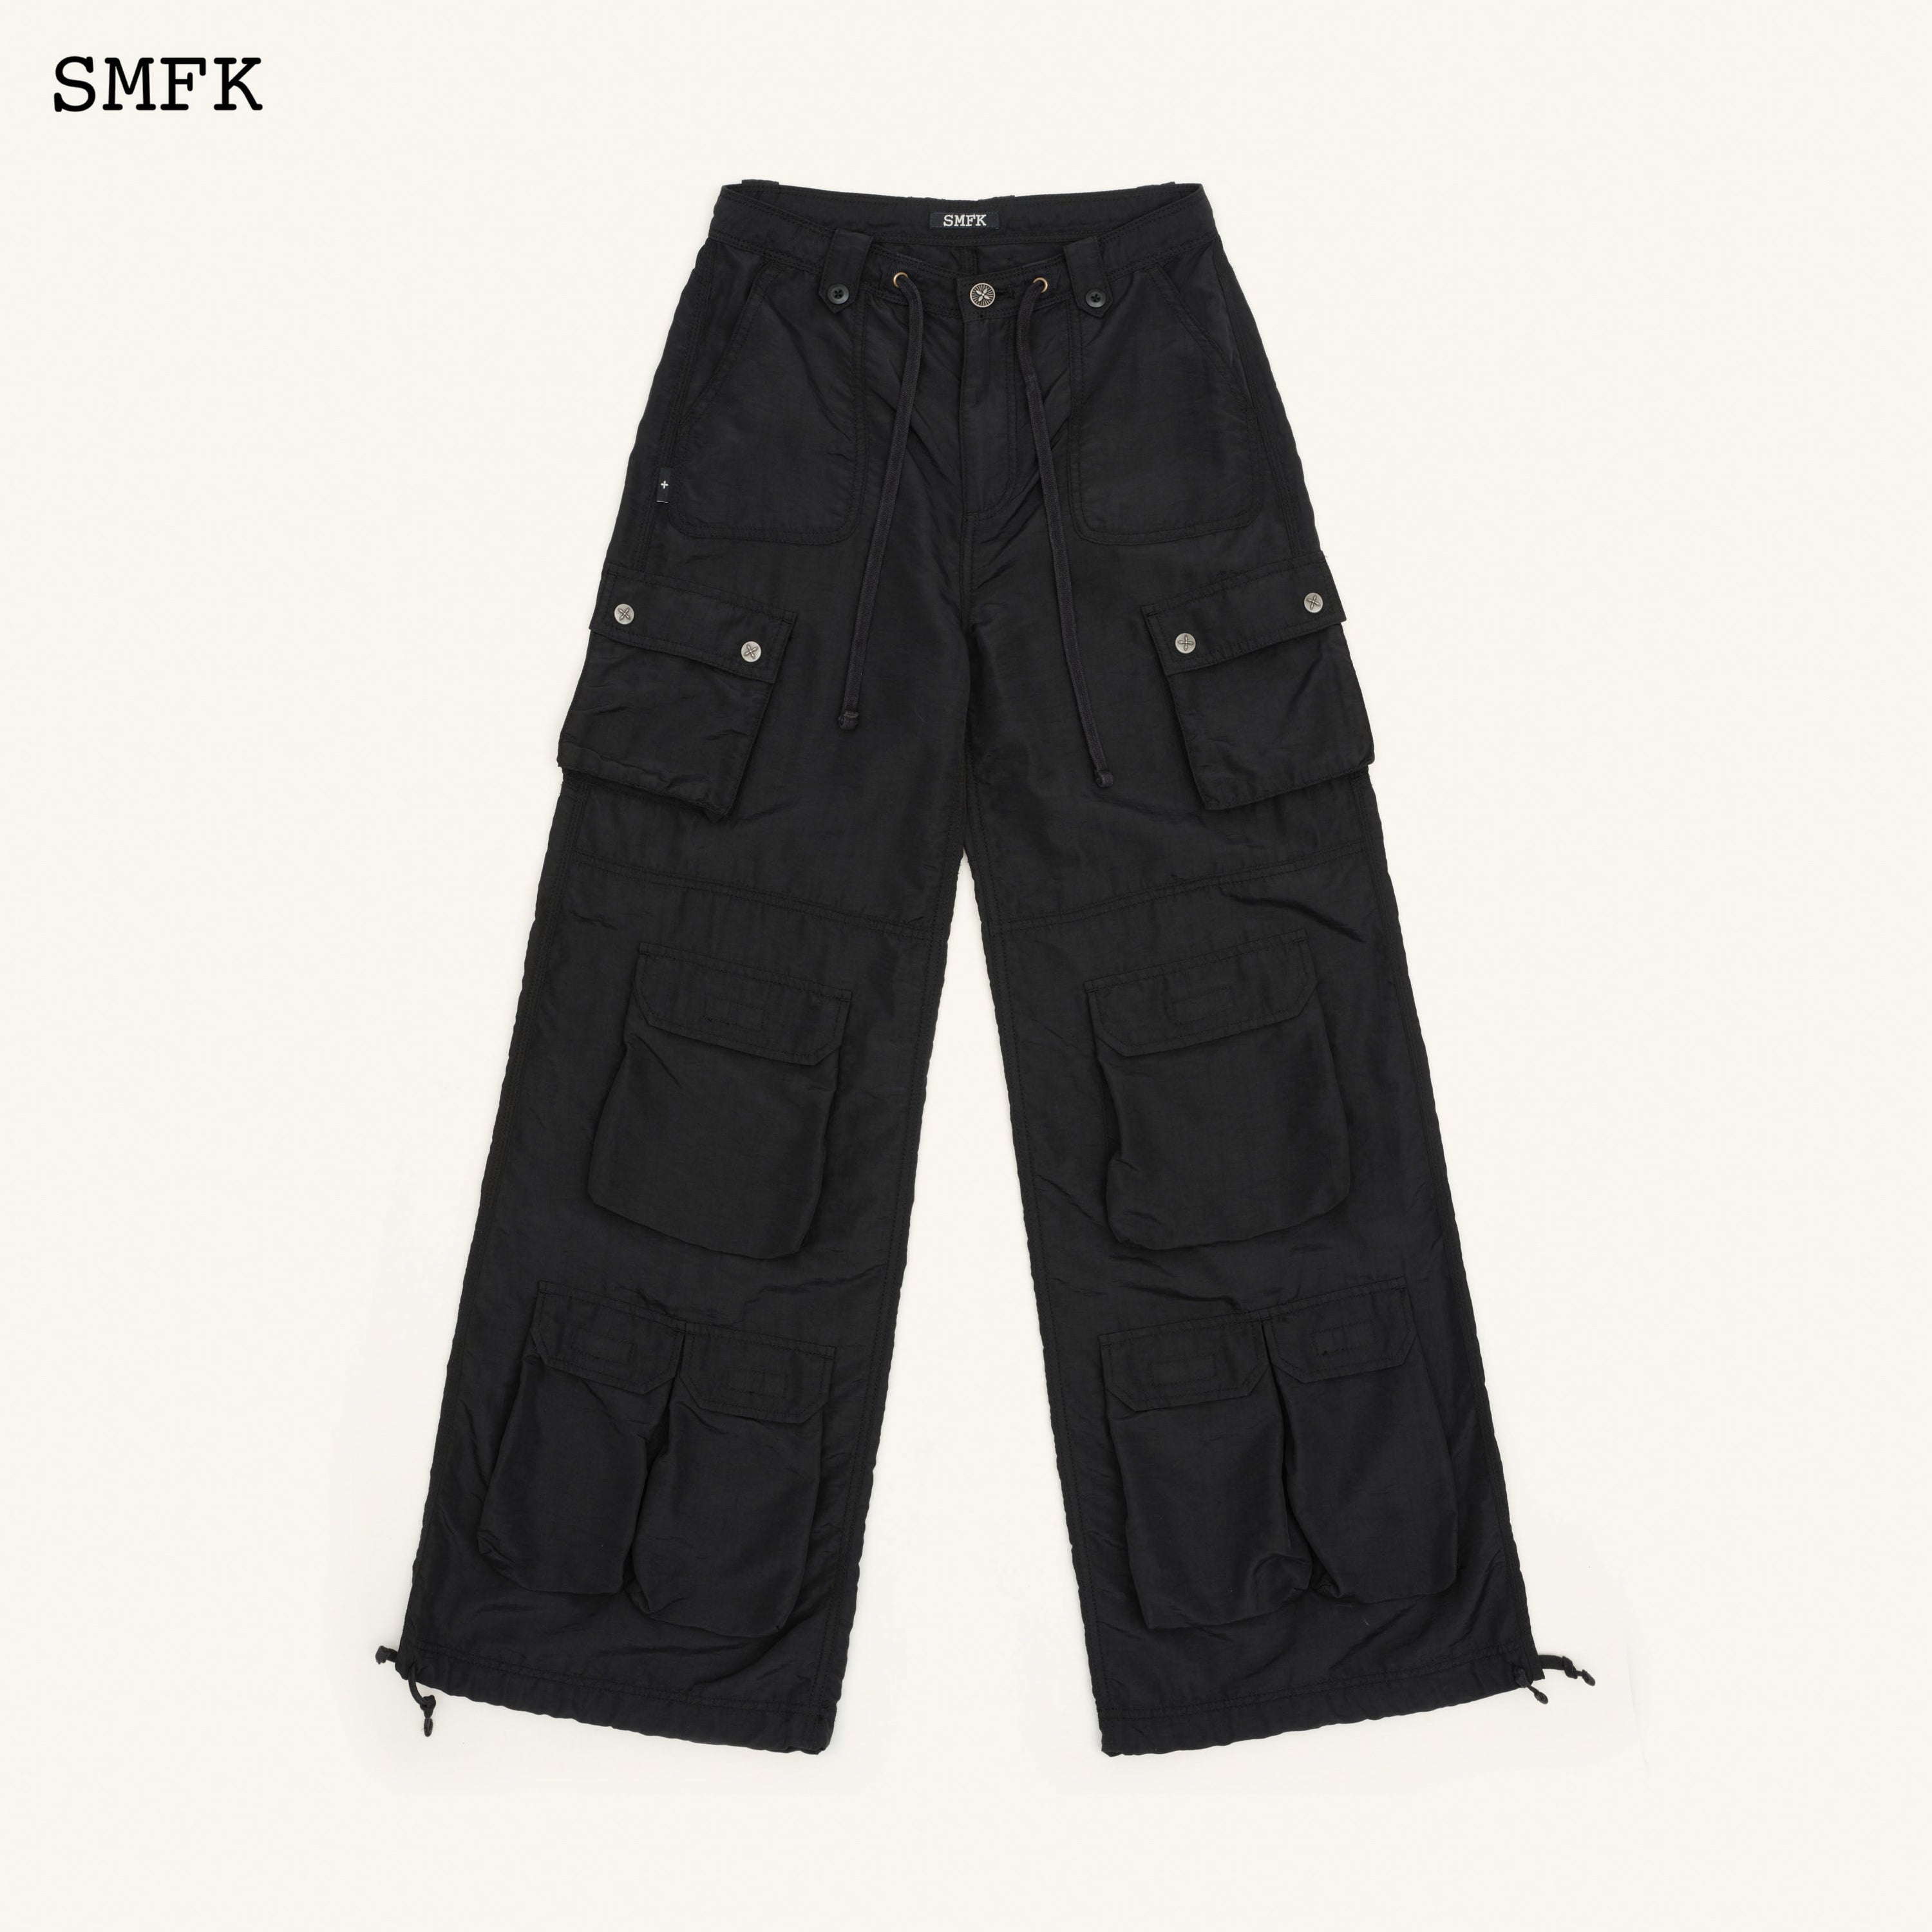 Ancient Myth Panther Black Flared Hiking Pants - SMFK Official